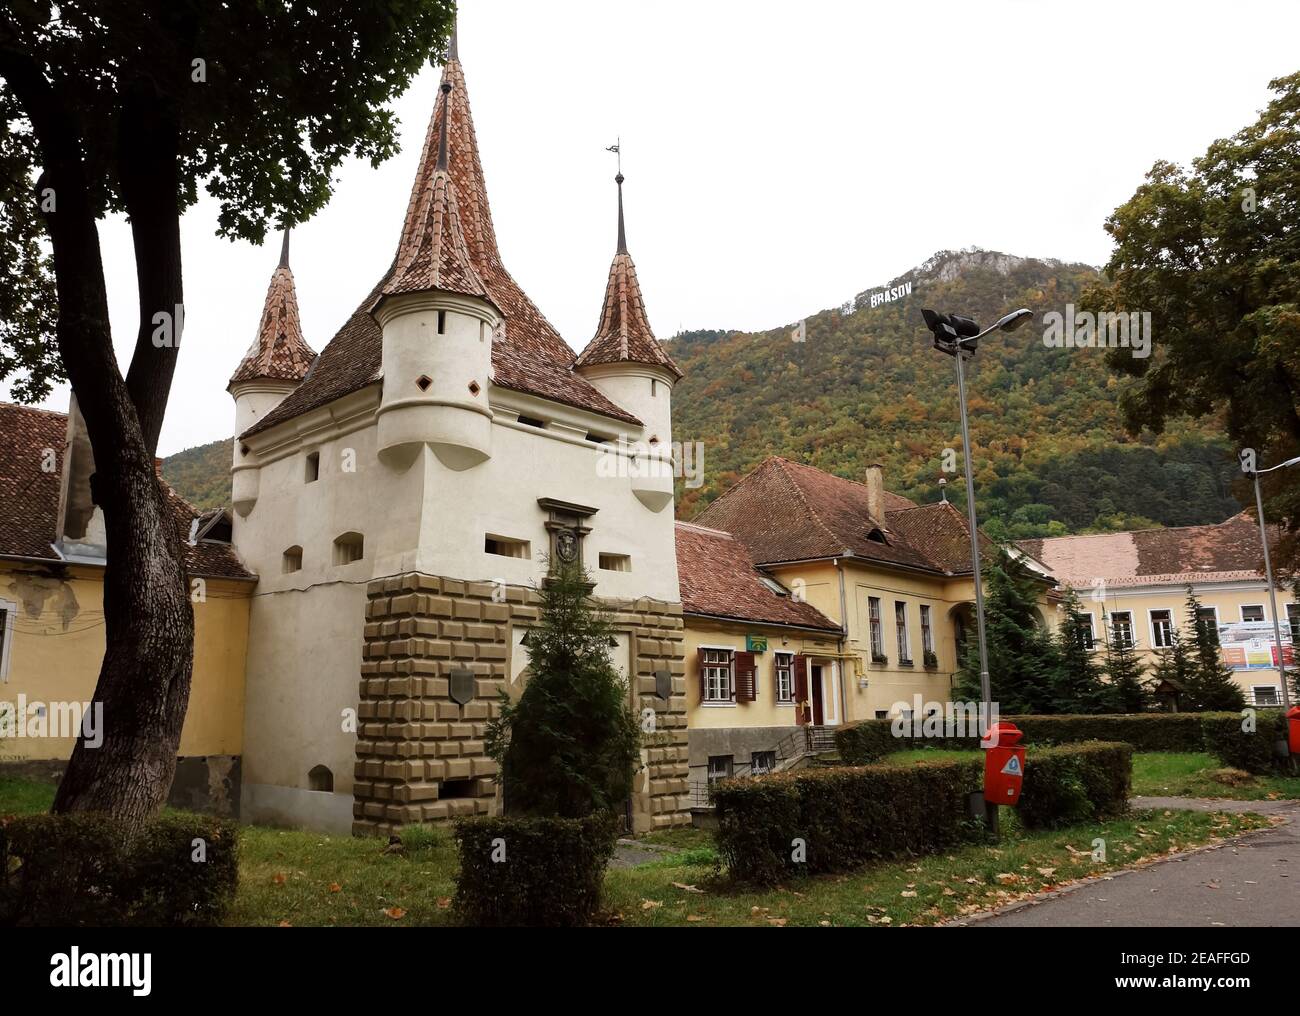 The old tower and gate in the city of Brasov, which is located in the central part of the Romania, about 166 kilometres north of Bucharest. Stock Photo